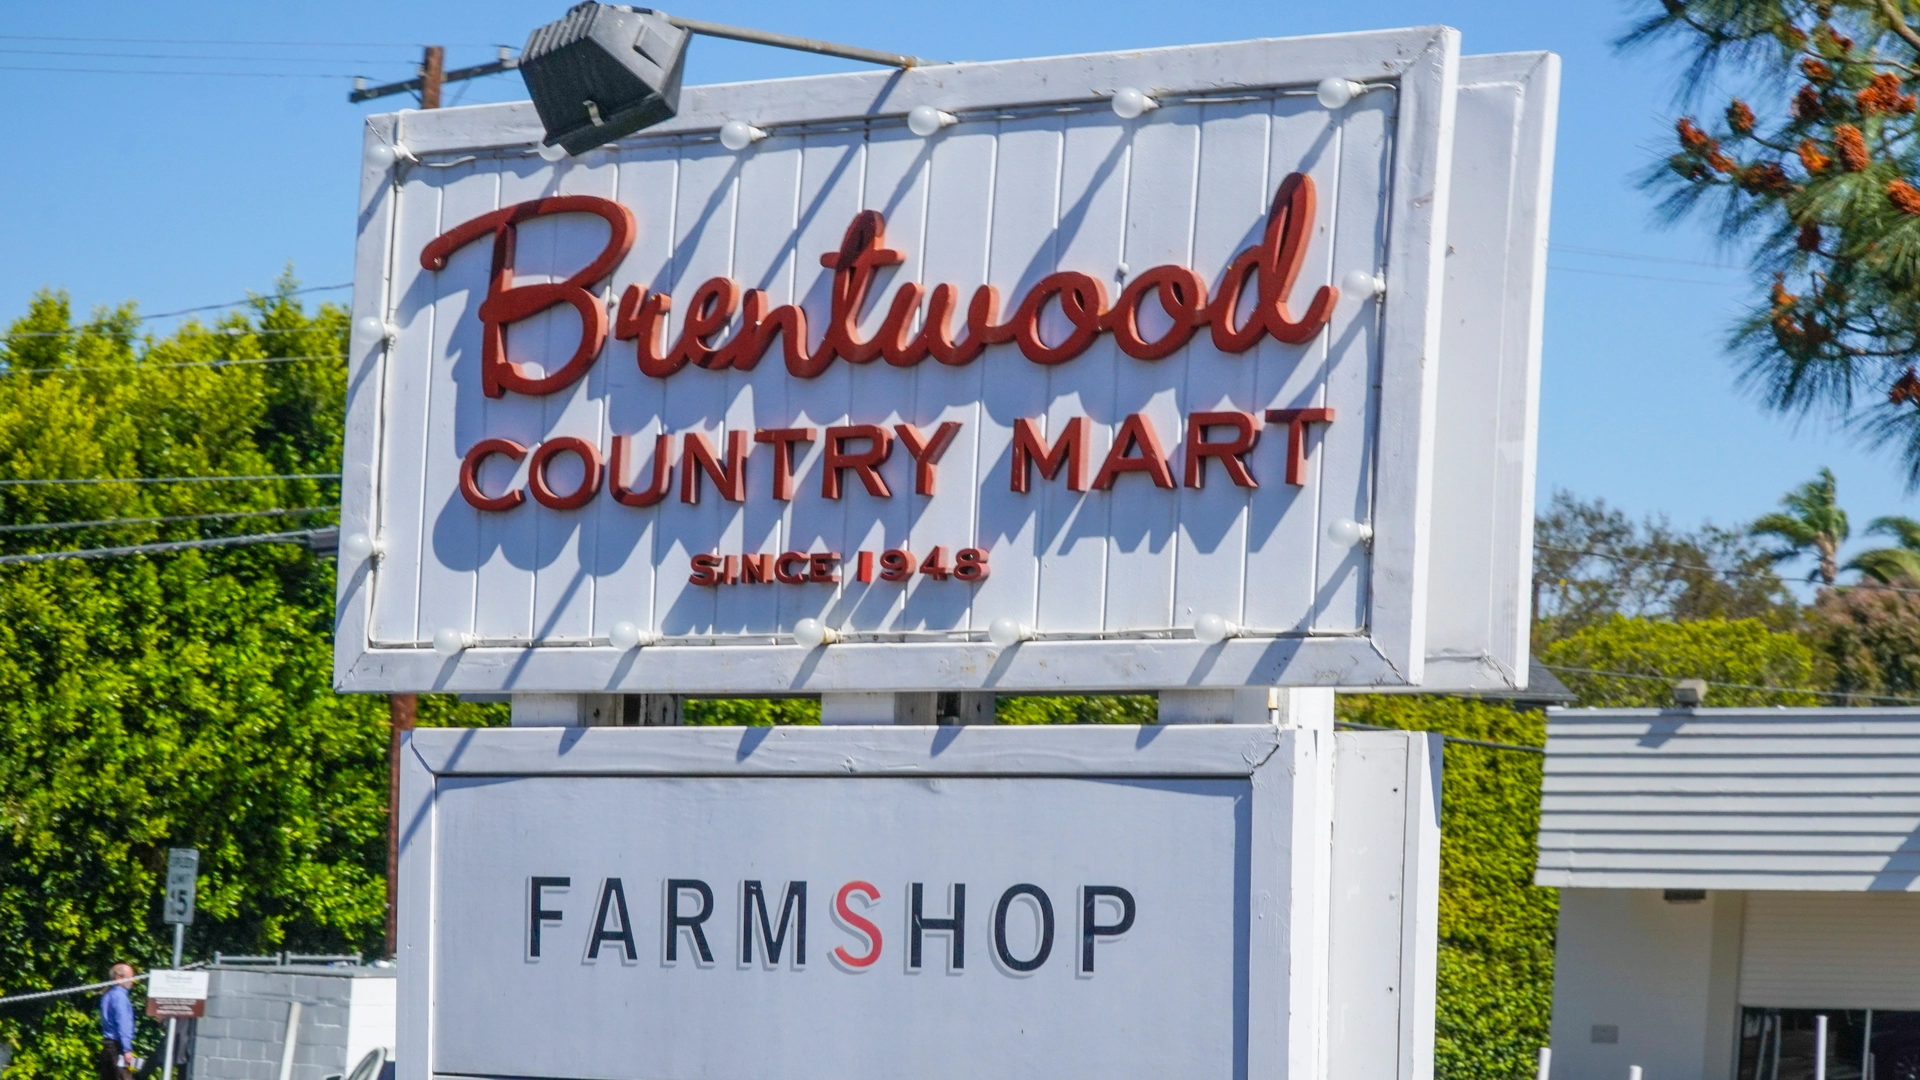 brentwood countrymart sign